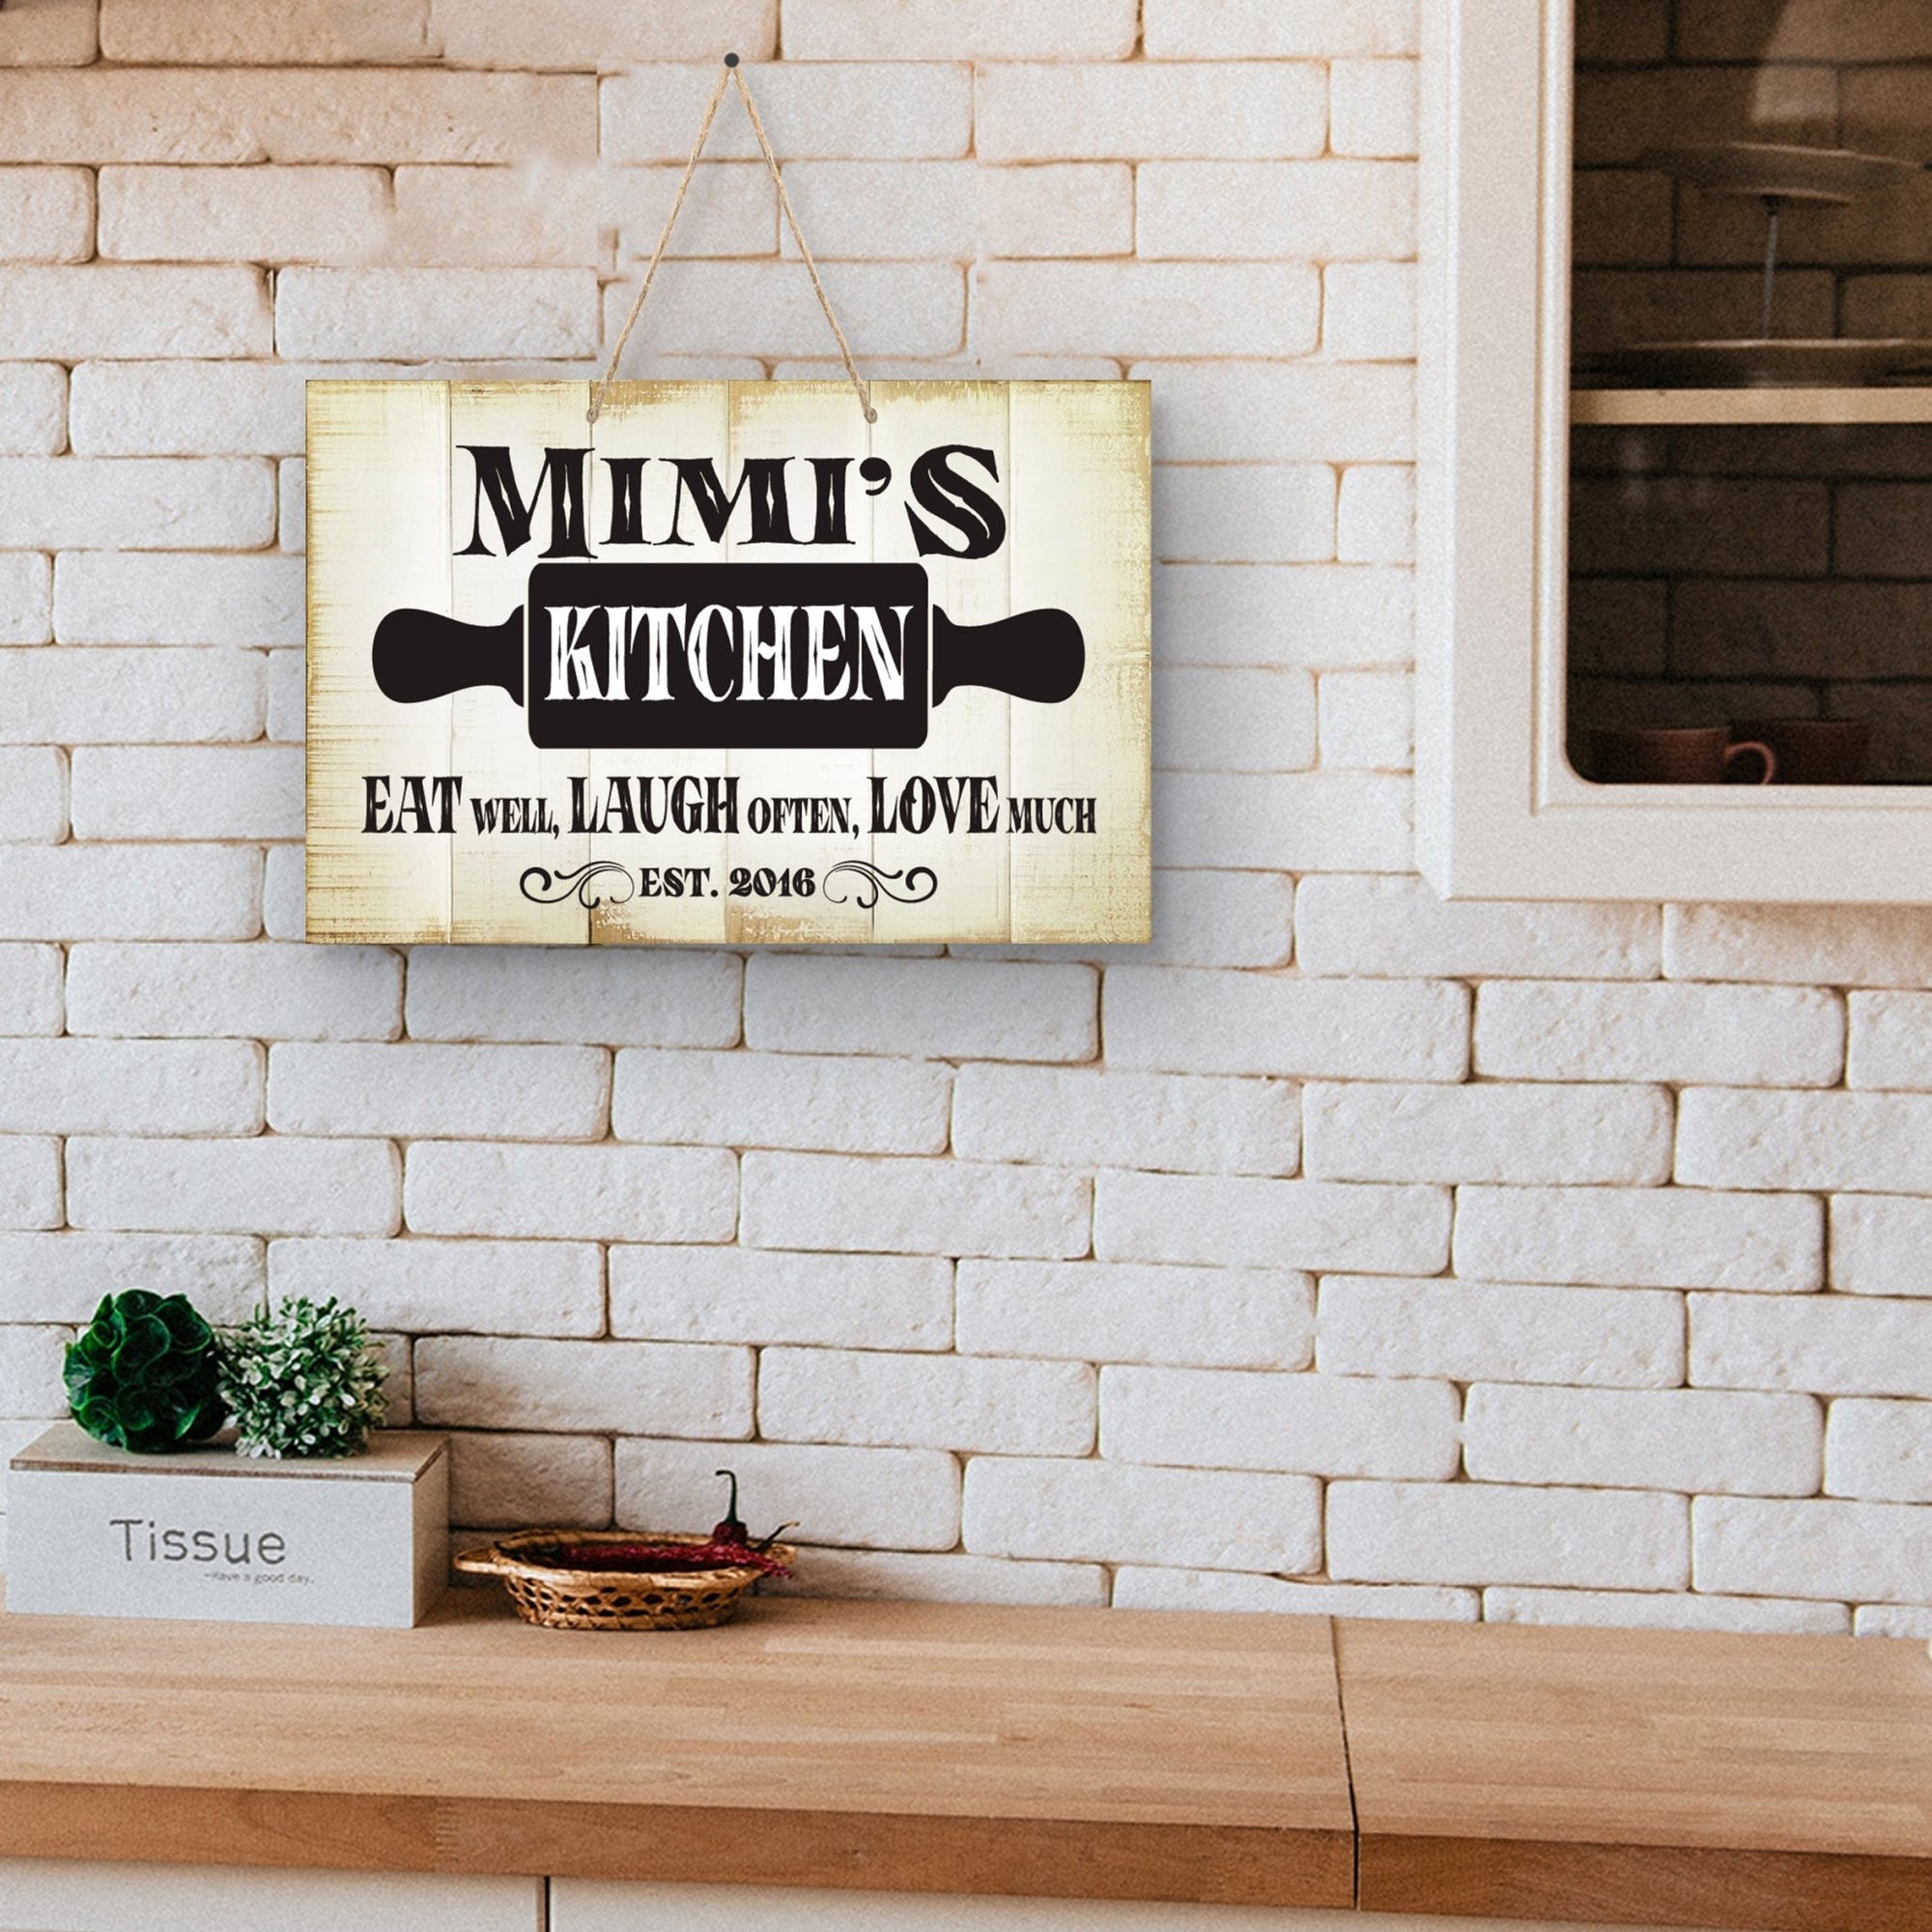 Inspirational Wooden Rustic Wall Hanging Rope Sign Kitchen Home Décor - Eat Well, Laugh Often, Love Much [KITCHEN] - LifeSong Milestones